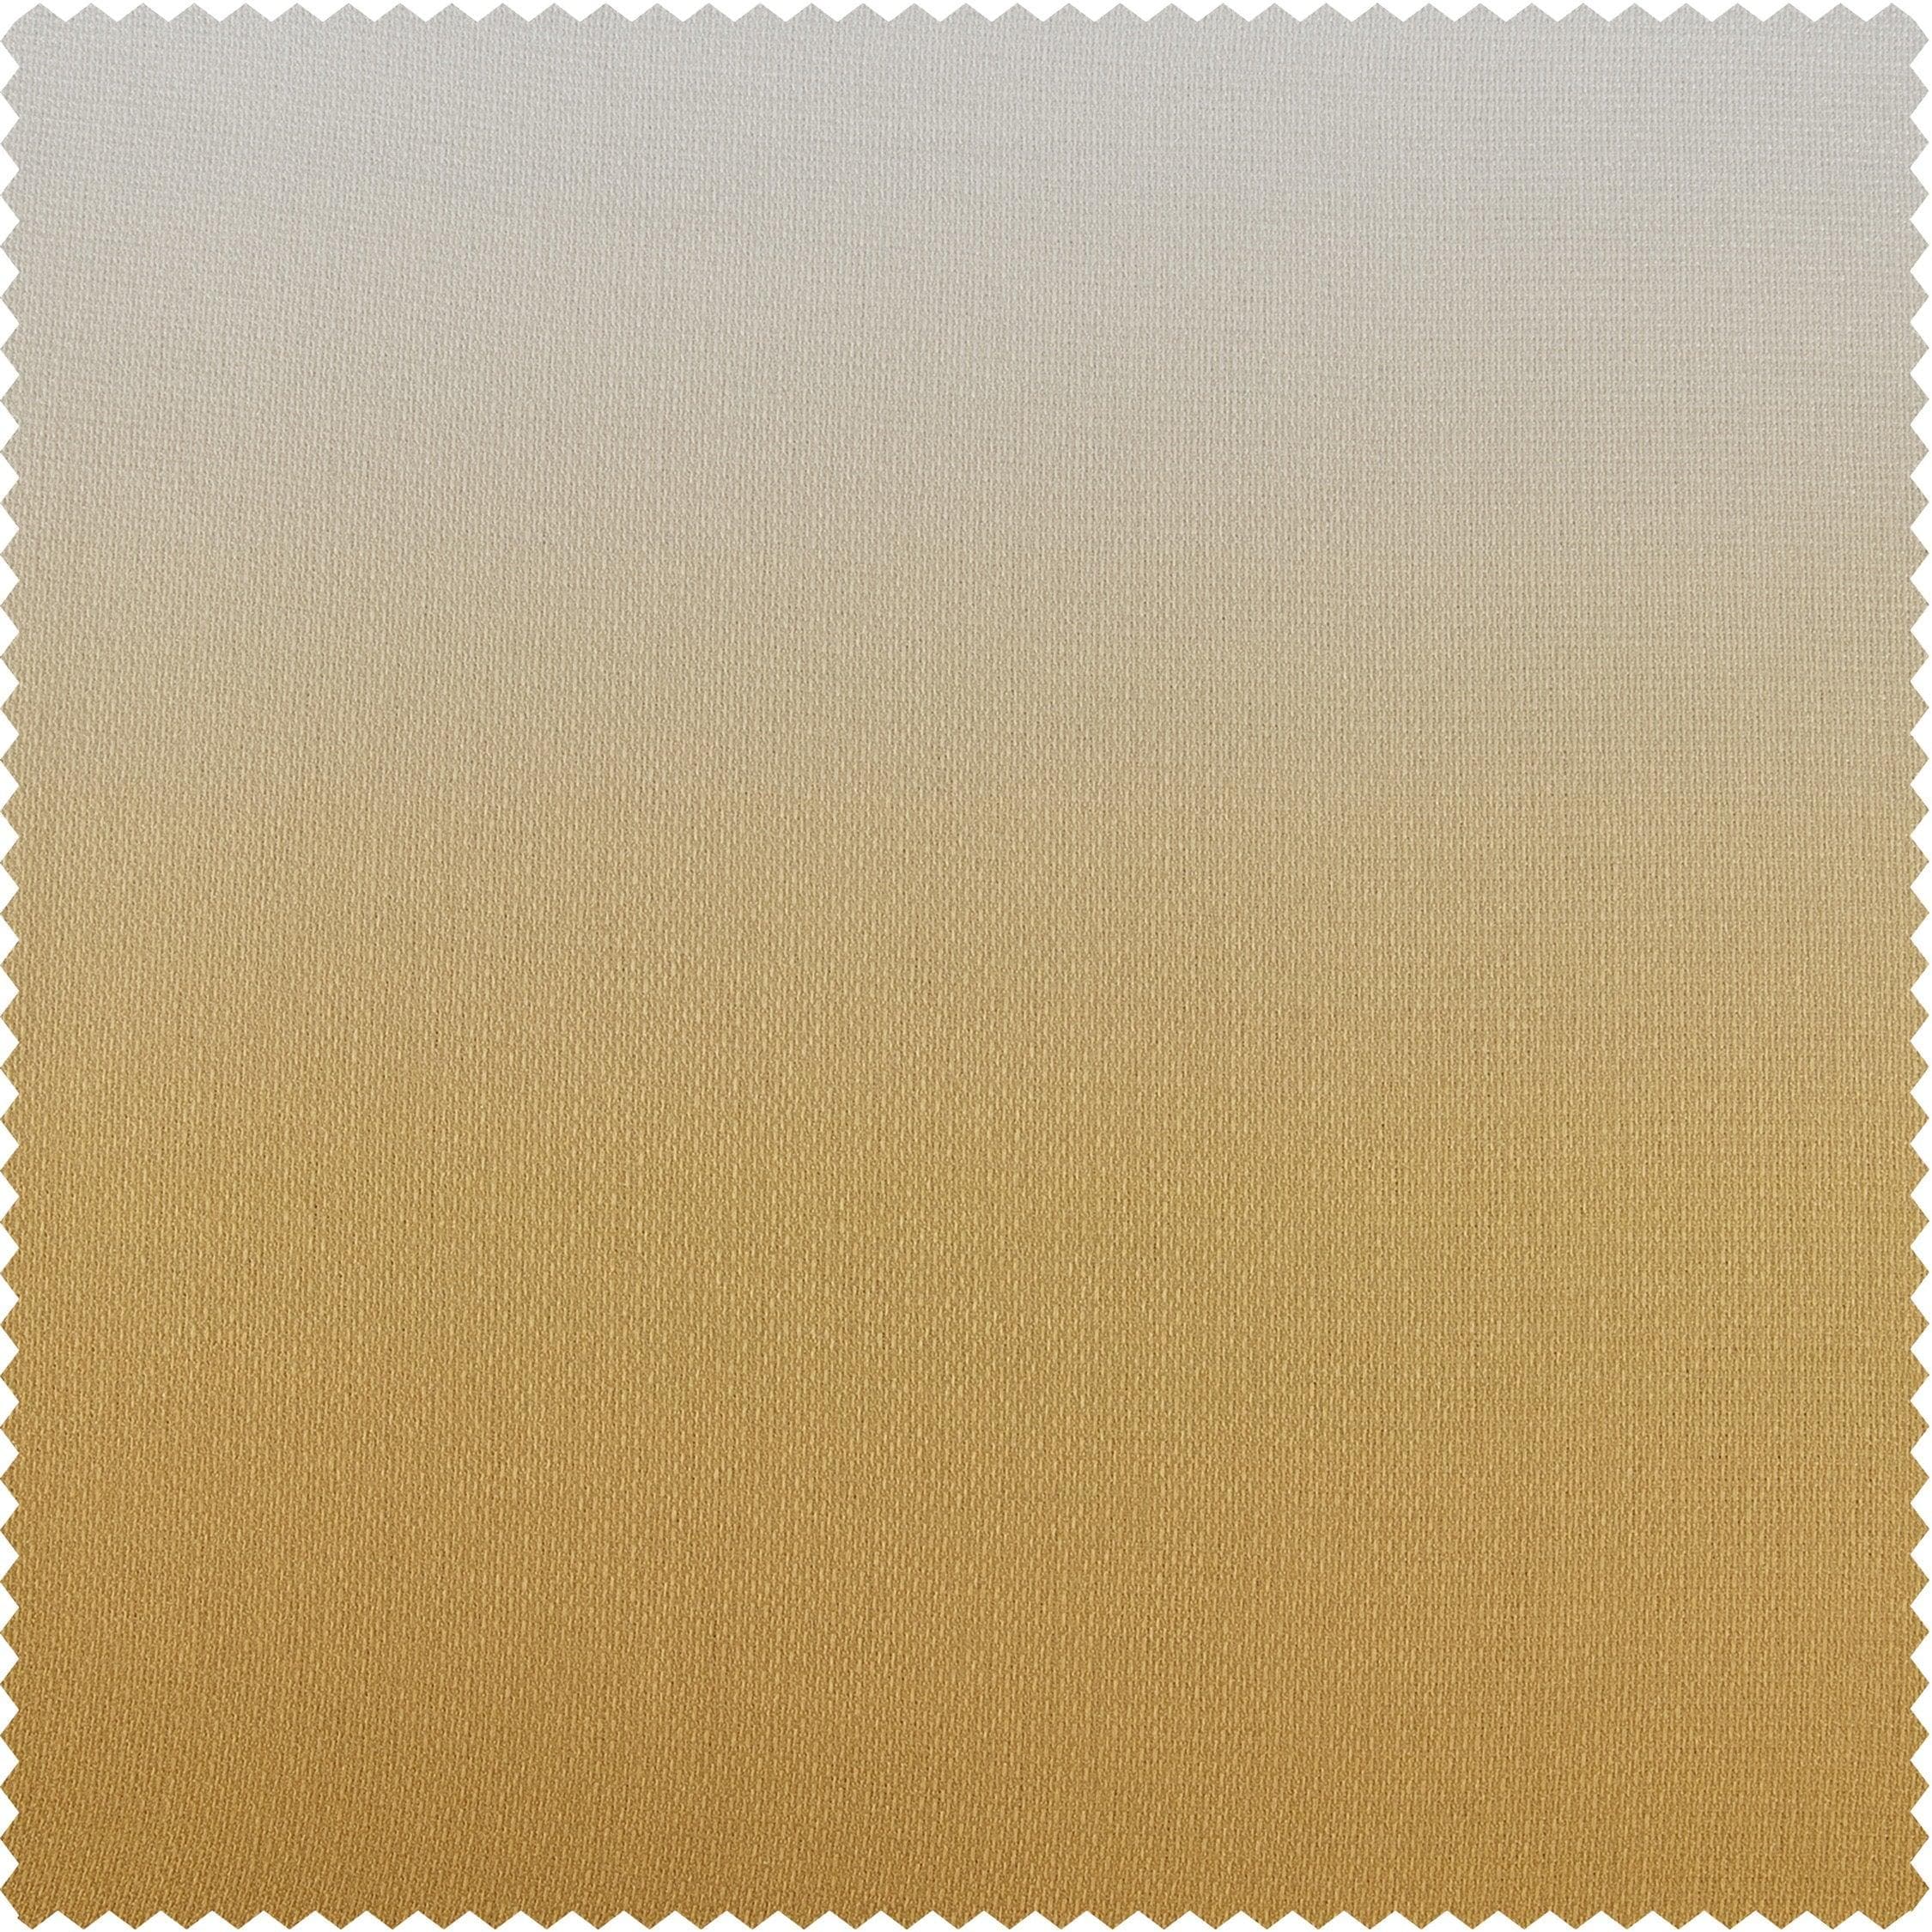 Gold Abstract Ombre Faux Linen Curtain